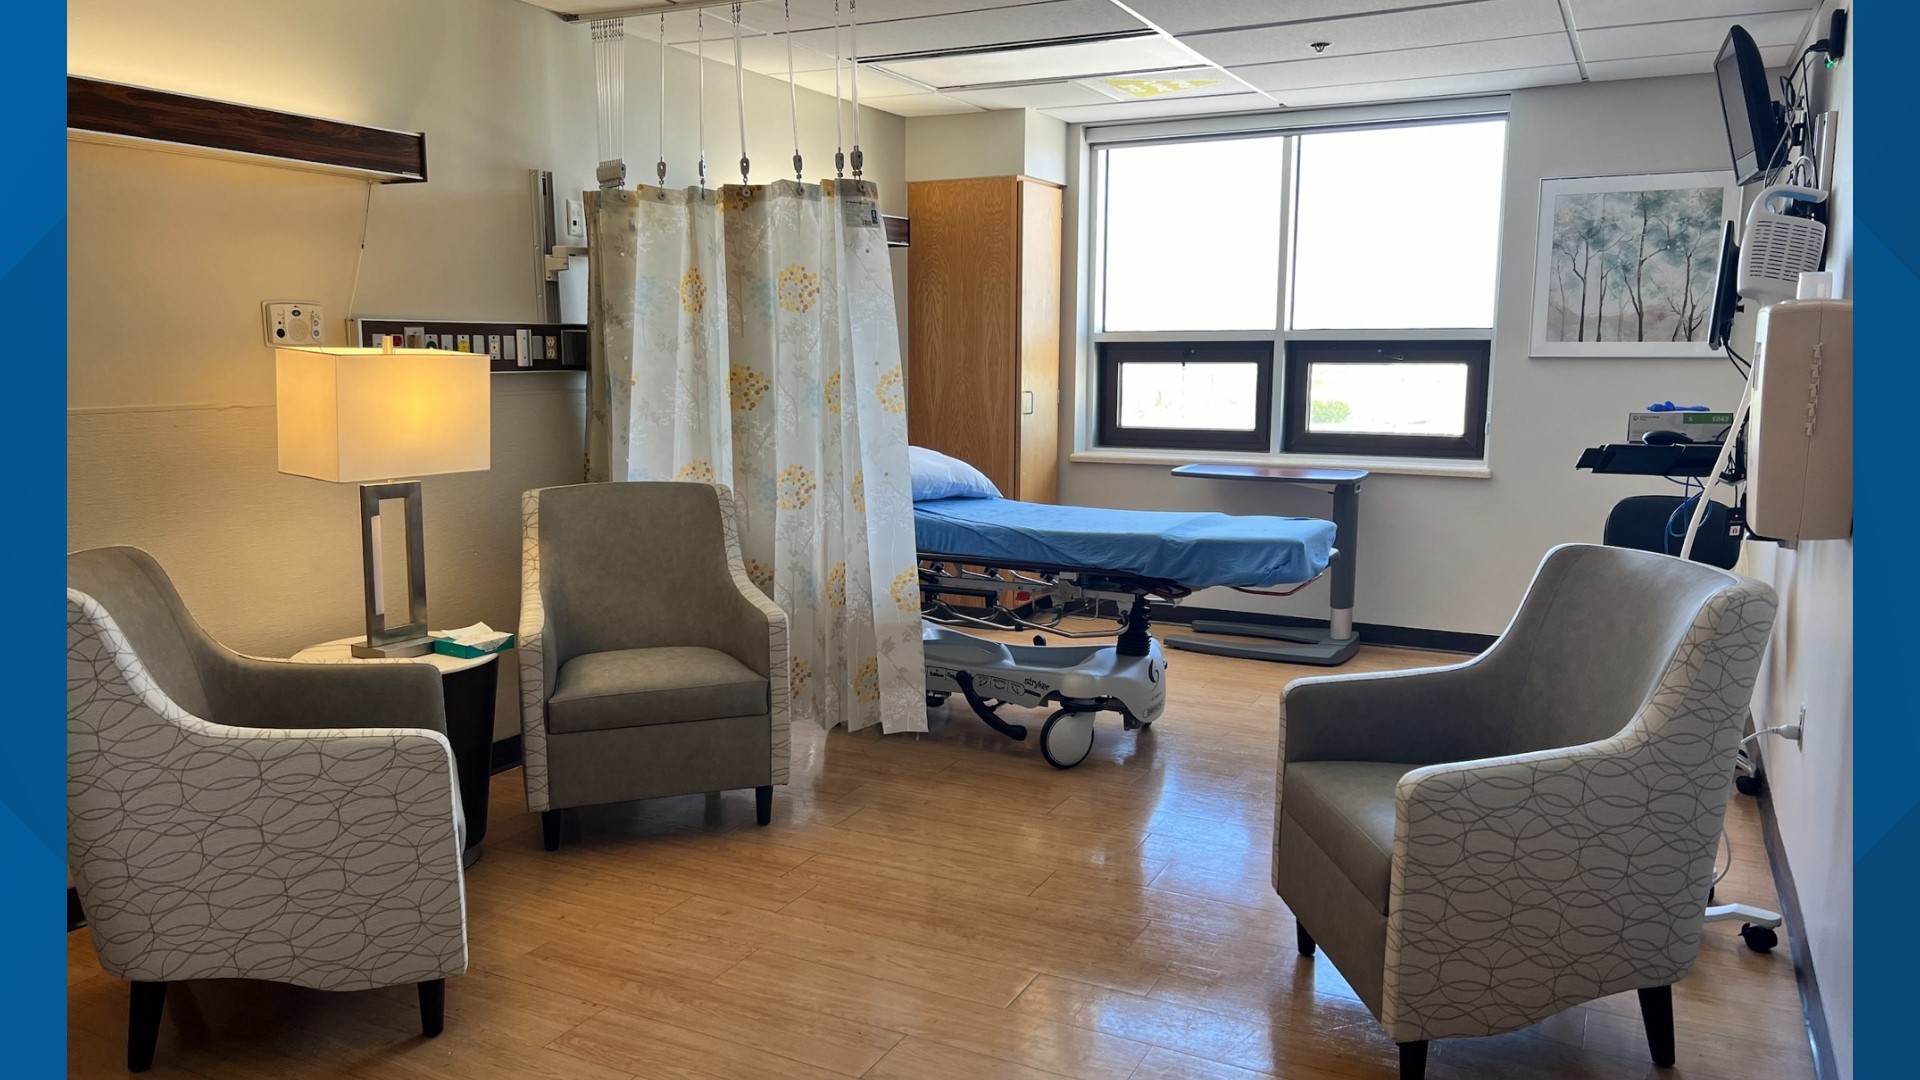 The new S.A.F.E. room at Texas Health offers sexual assault survivors an alternative to the emergency room.